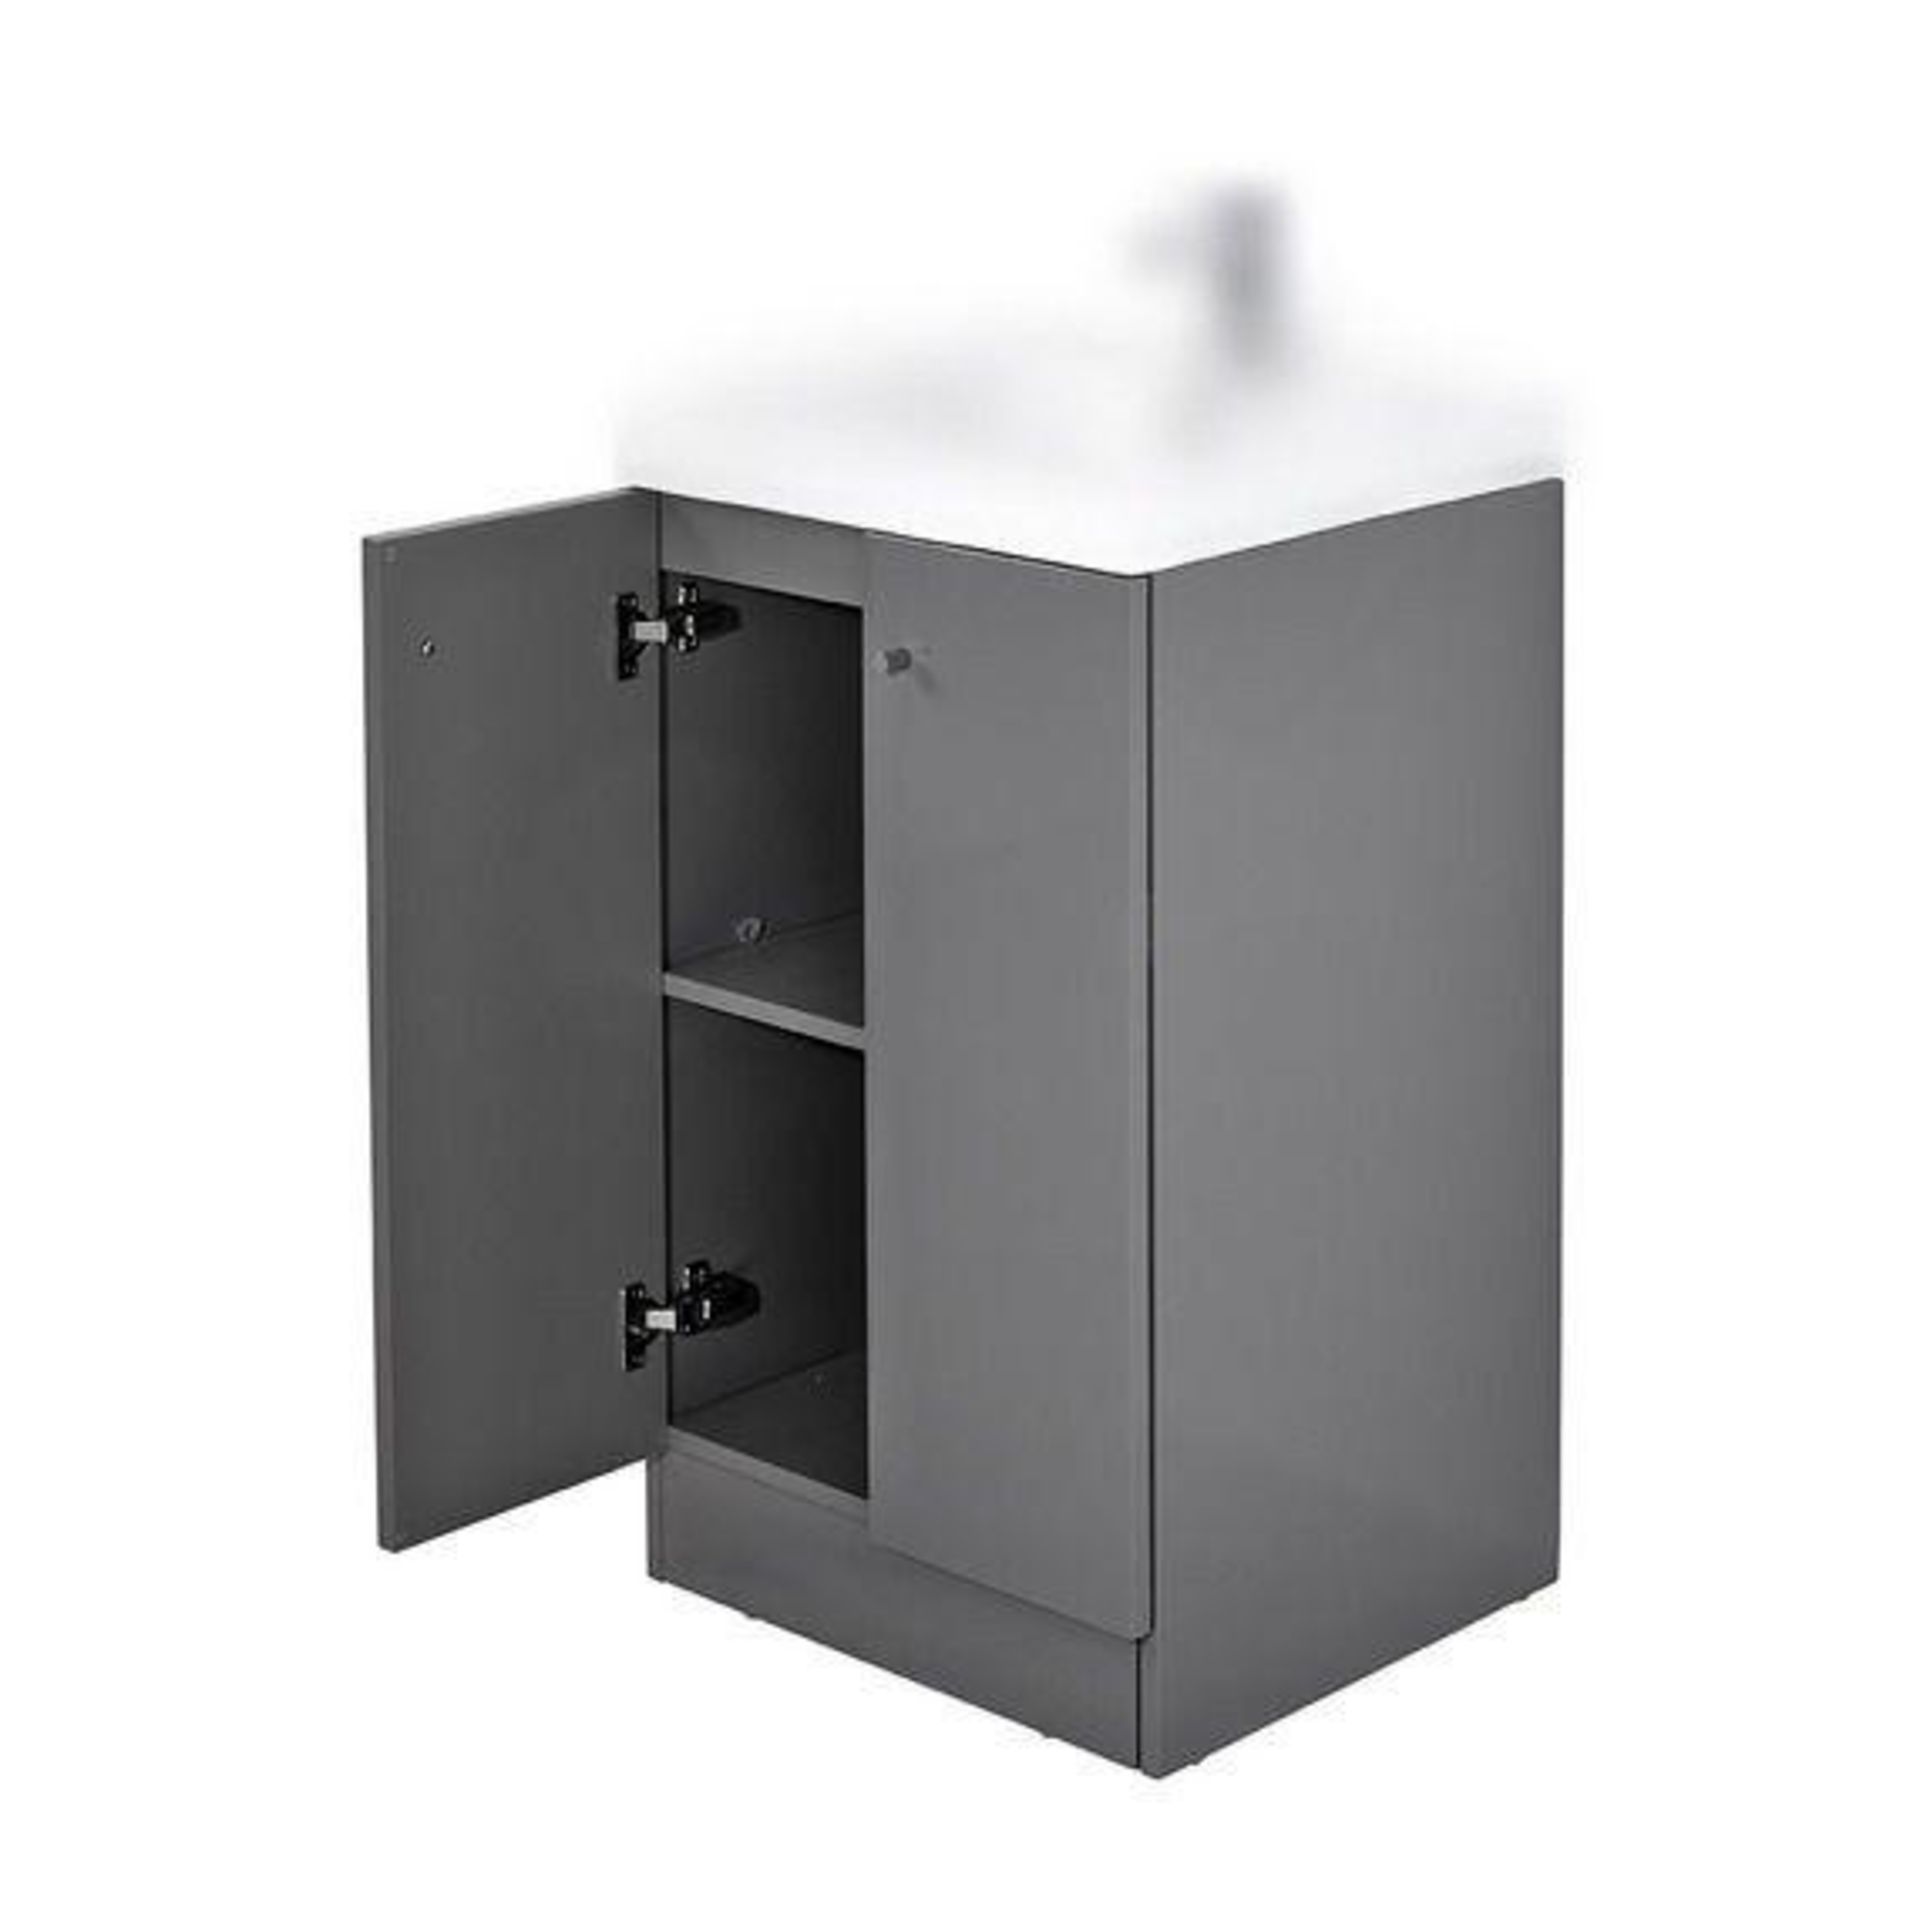 1 x Alpine Duo 500 Floor Standing Vanity Unit - Ultra-Modern Square Design With Soft Close Doors and - Image 4 of 5